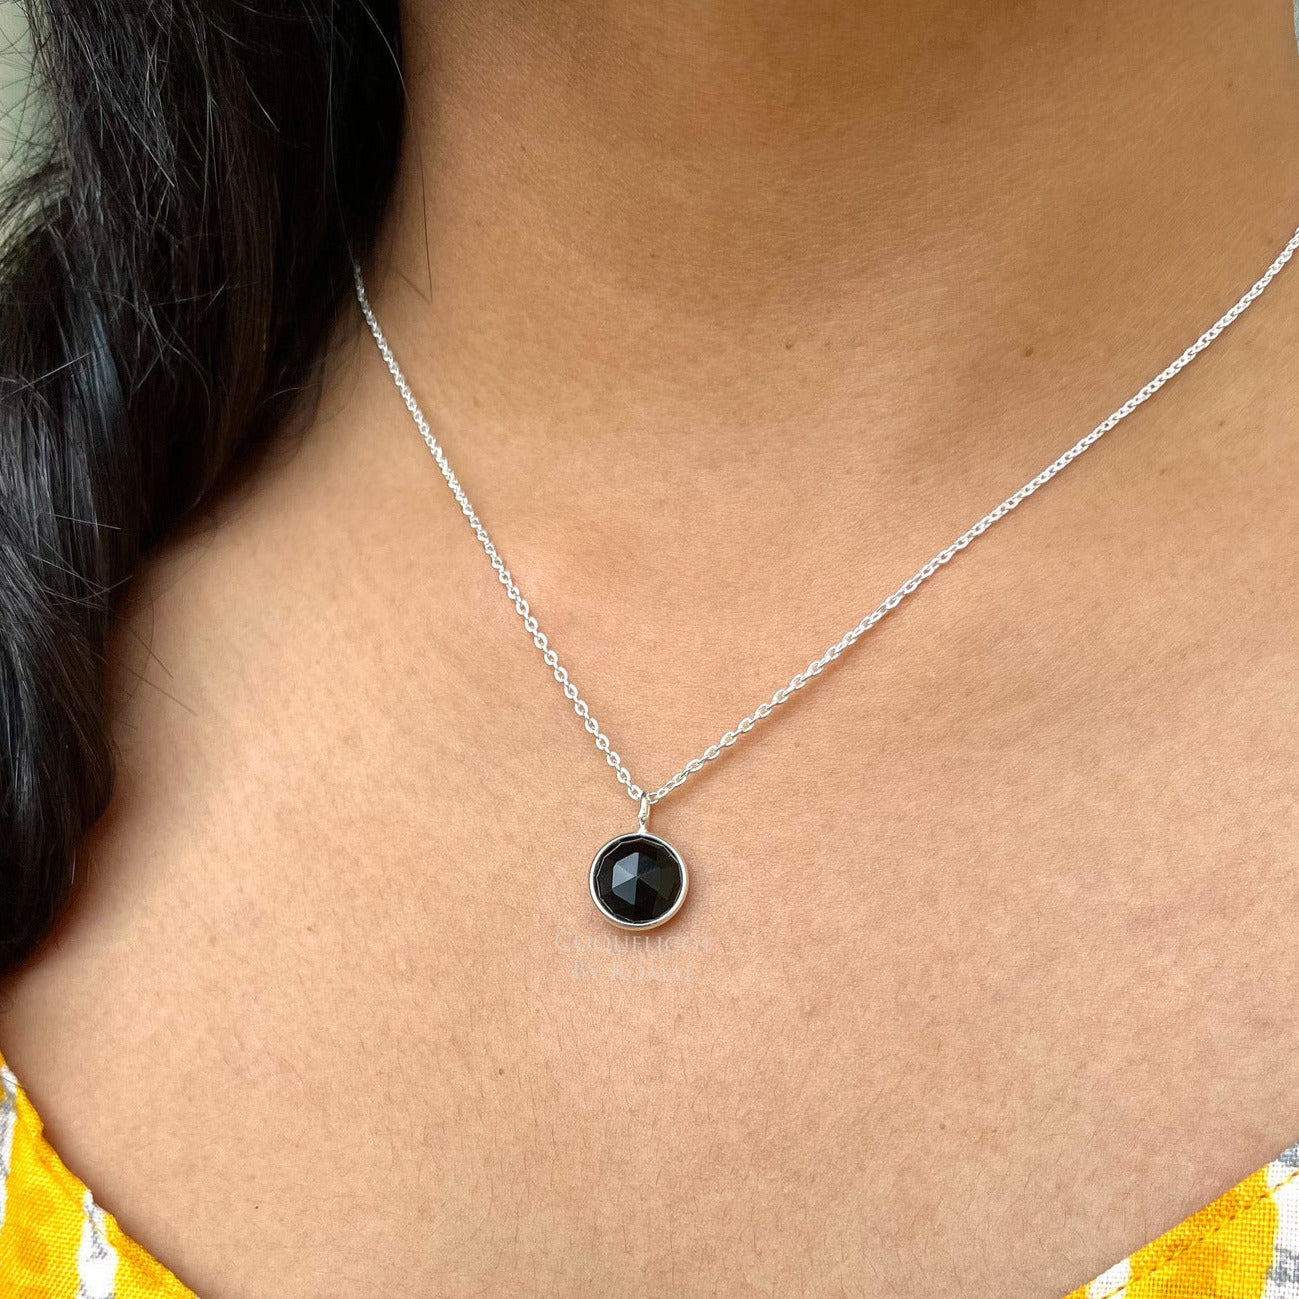 Black Obsidian Necklace for Women, Oval Obsidian Pendant Gift for Her,  Large Polished Black Stone Necklace, Natural Gemstone Jewelry - Etsy